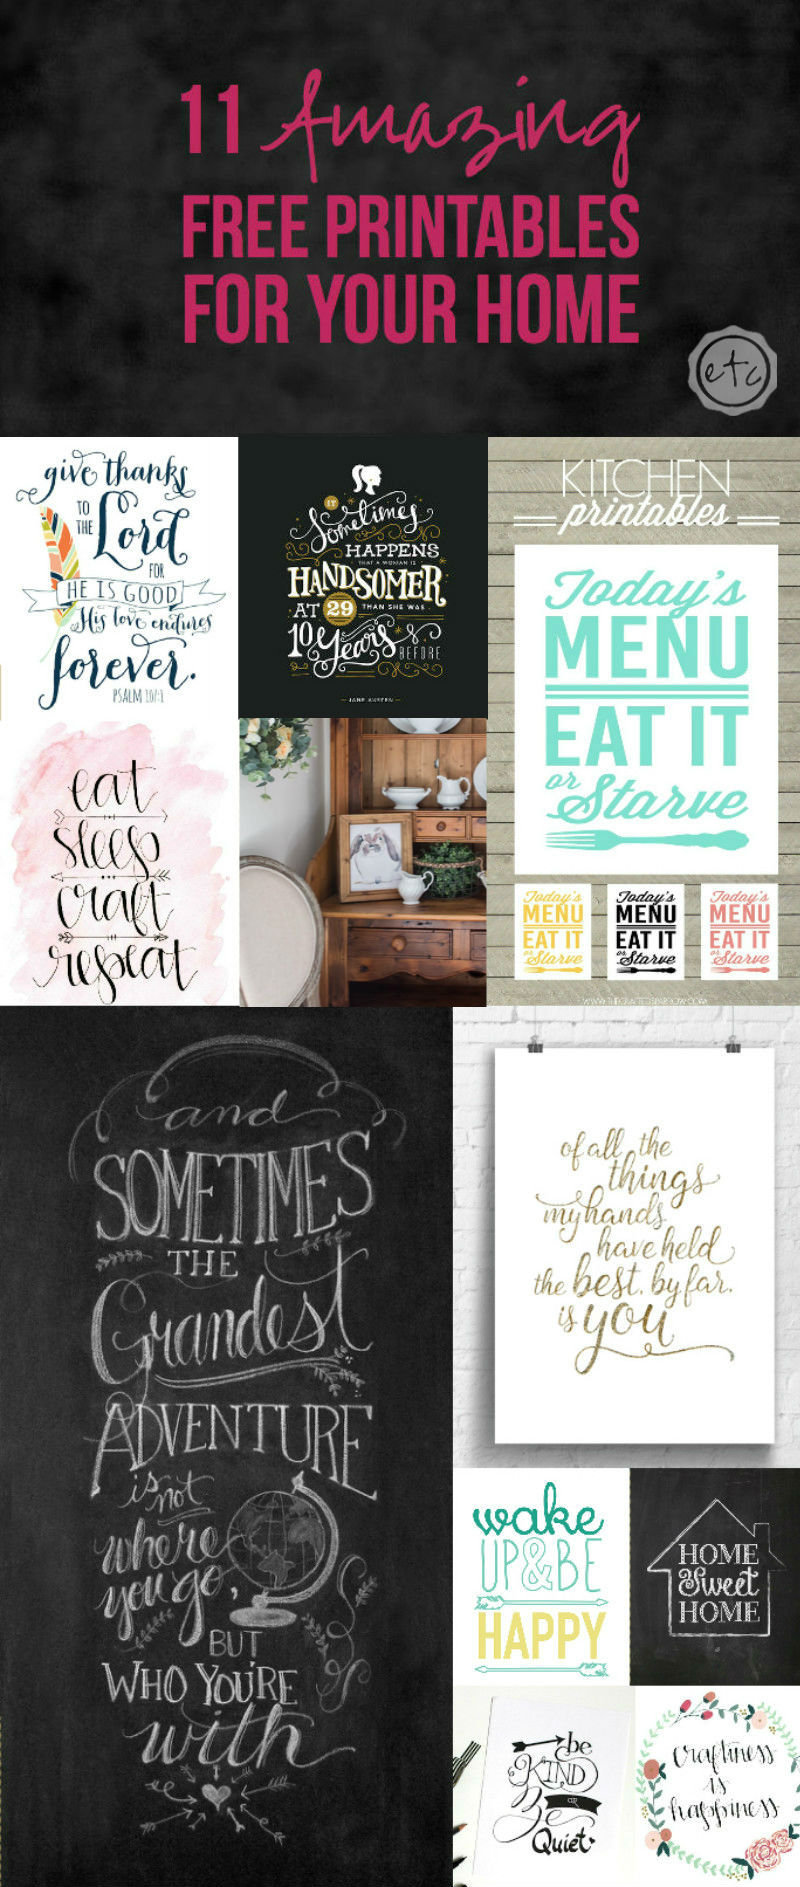 11 Amazing Free Printables for Your Home